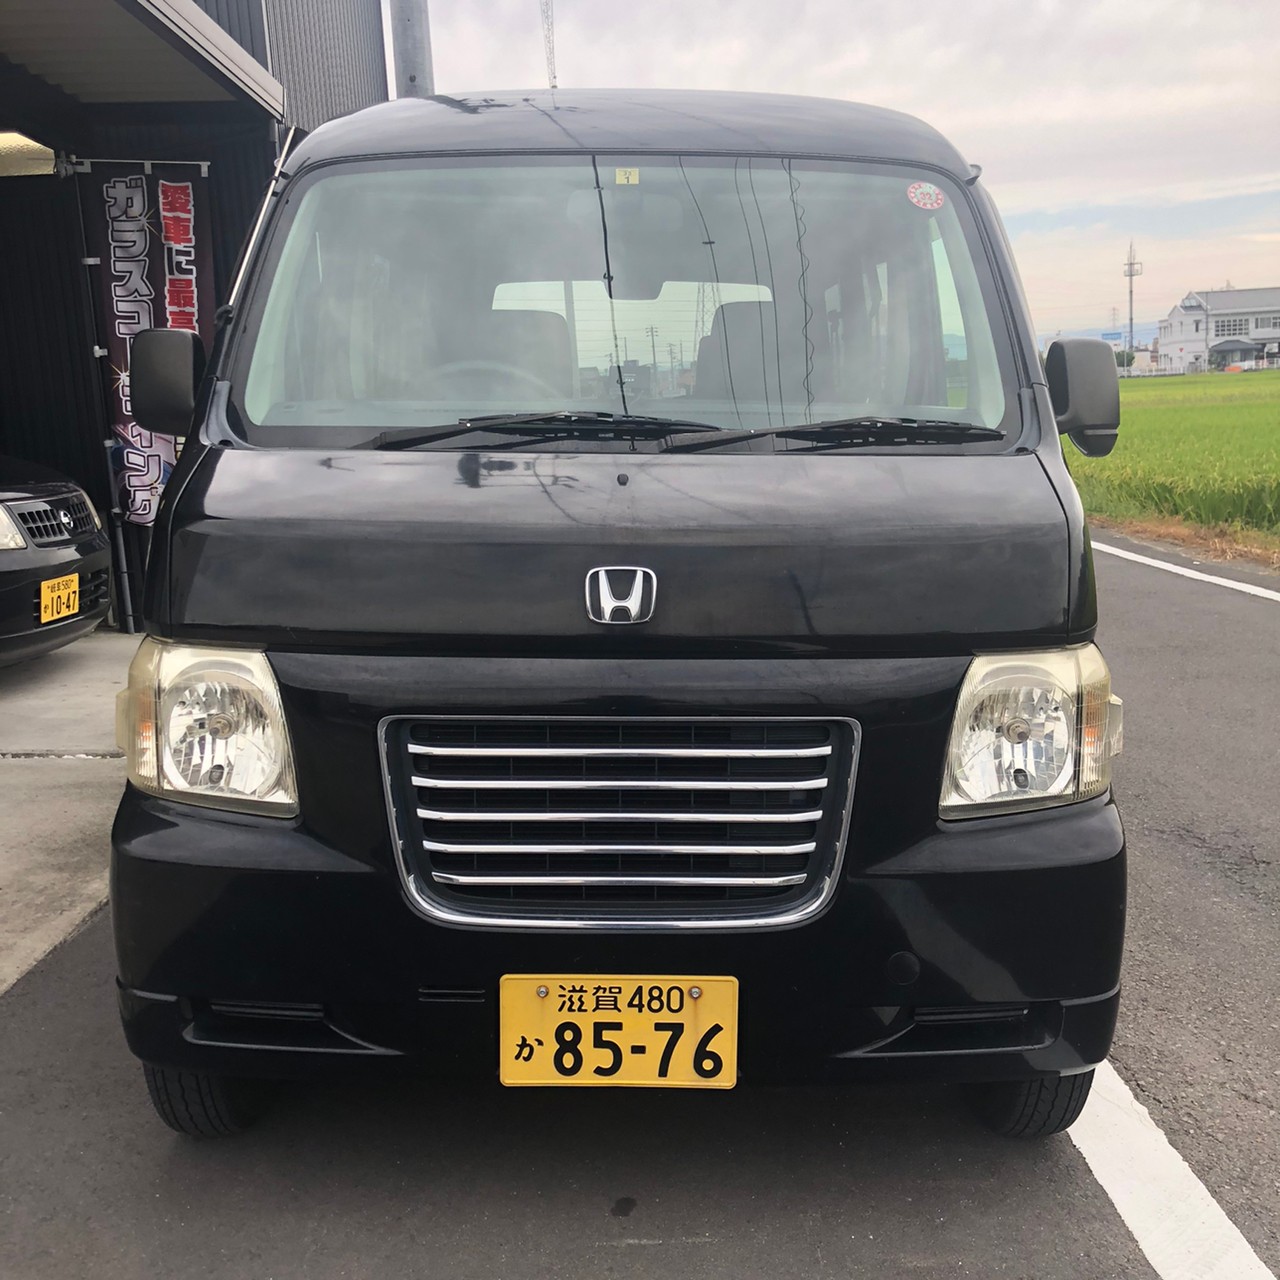 sold】総額9.9万円☆人気の箱バン☆4WD☆平成21年式 ホンダ バモス 